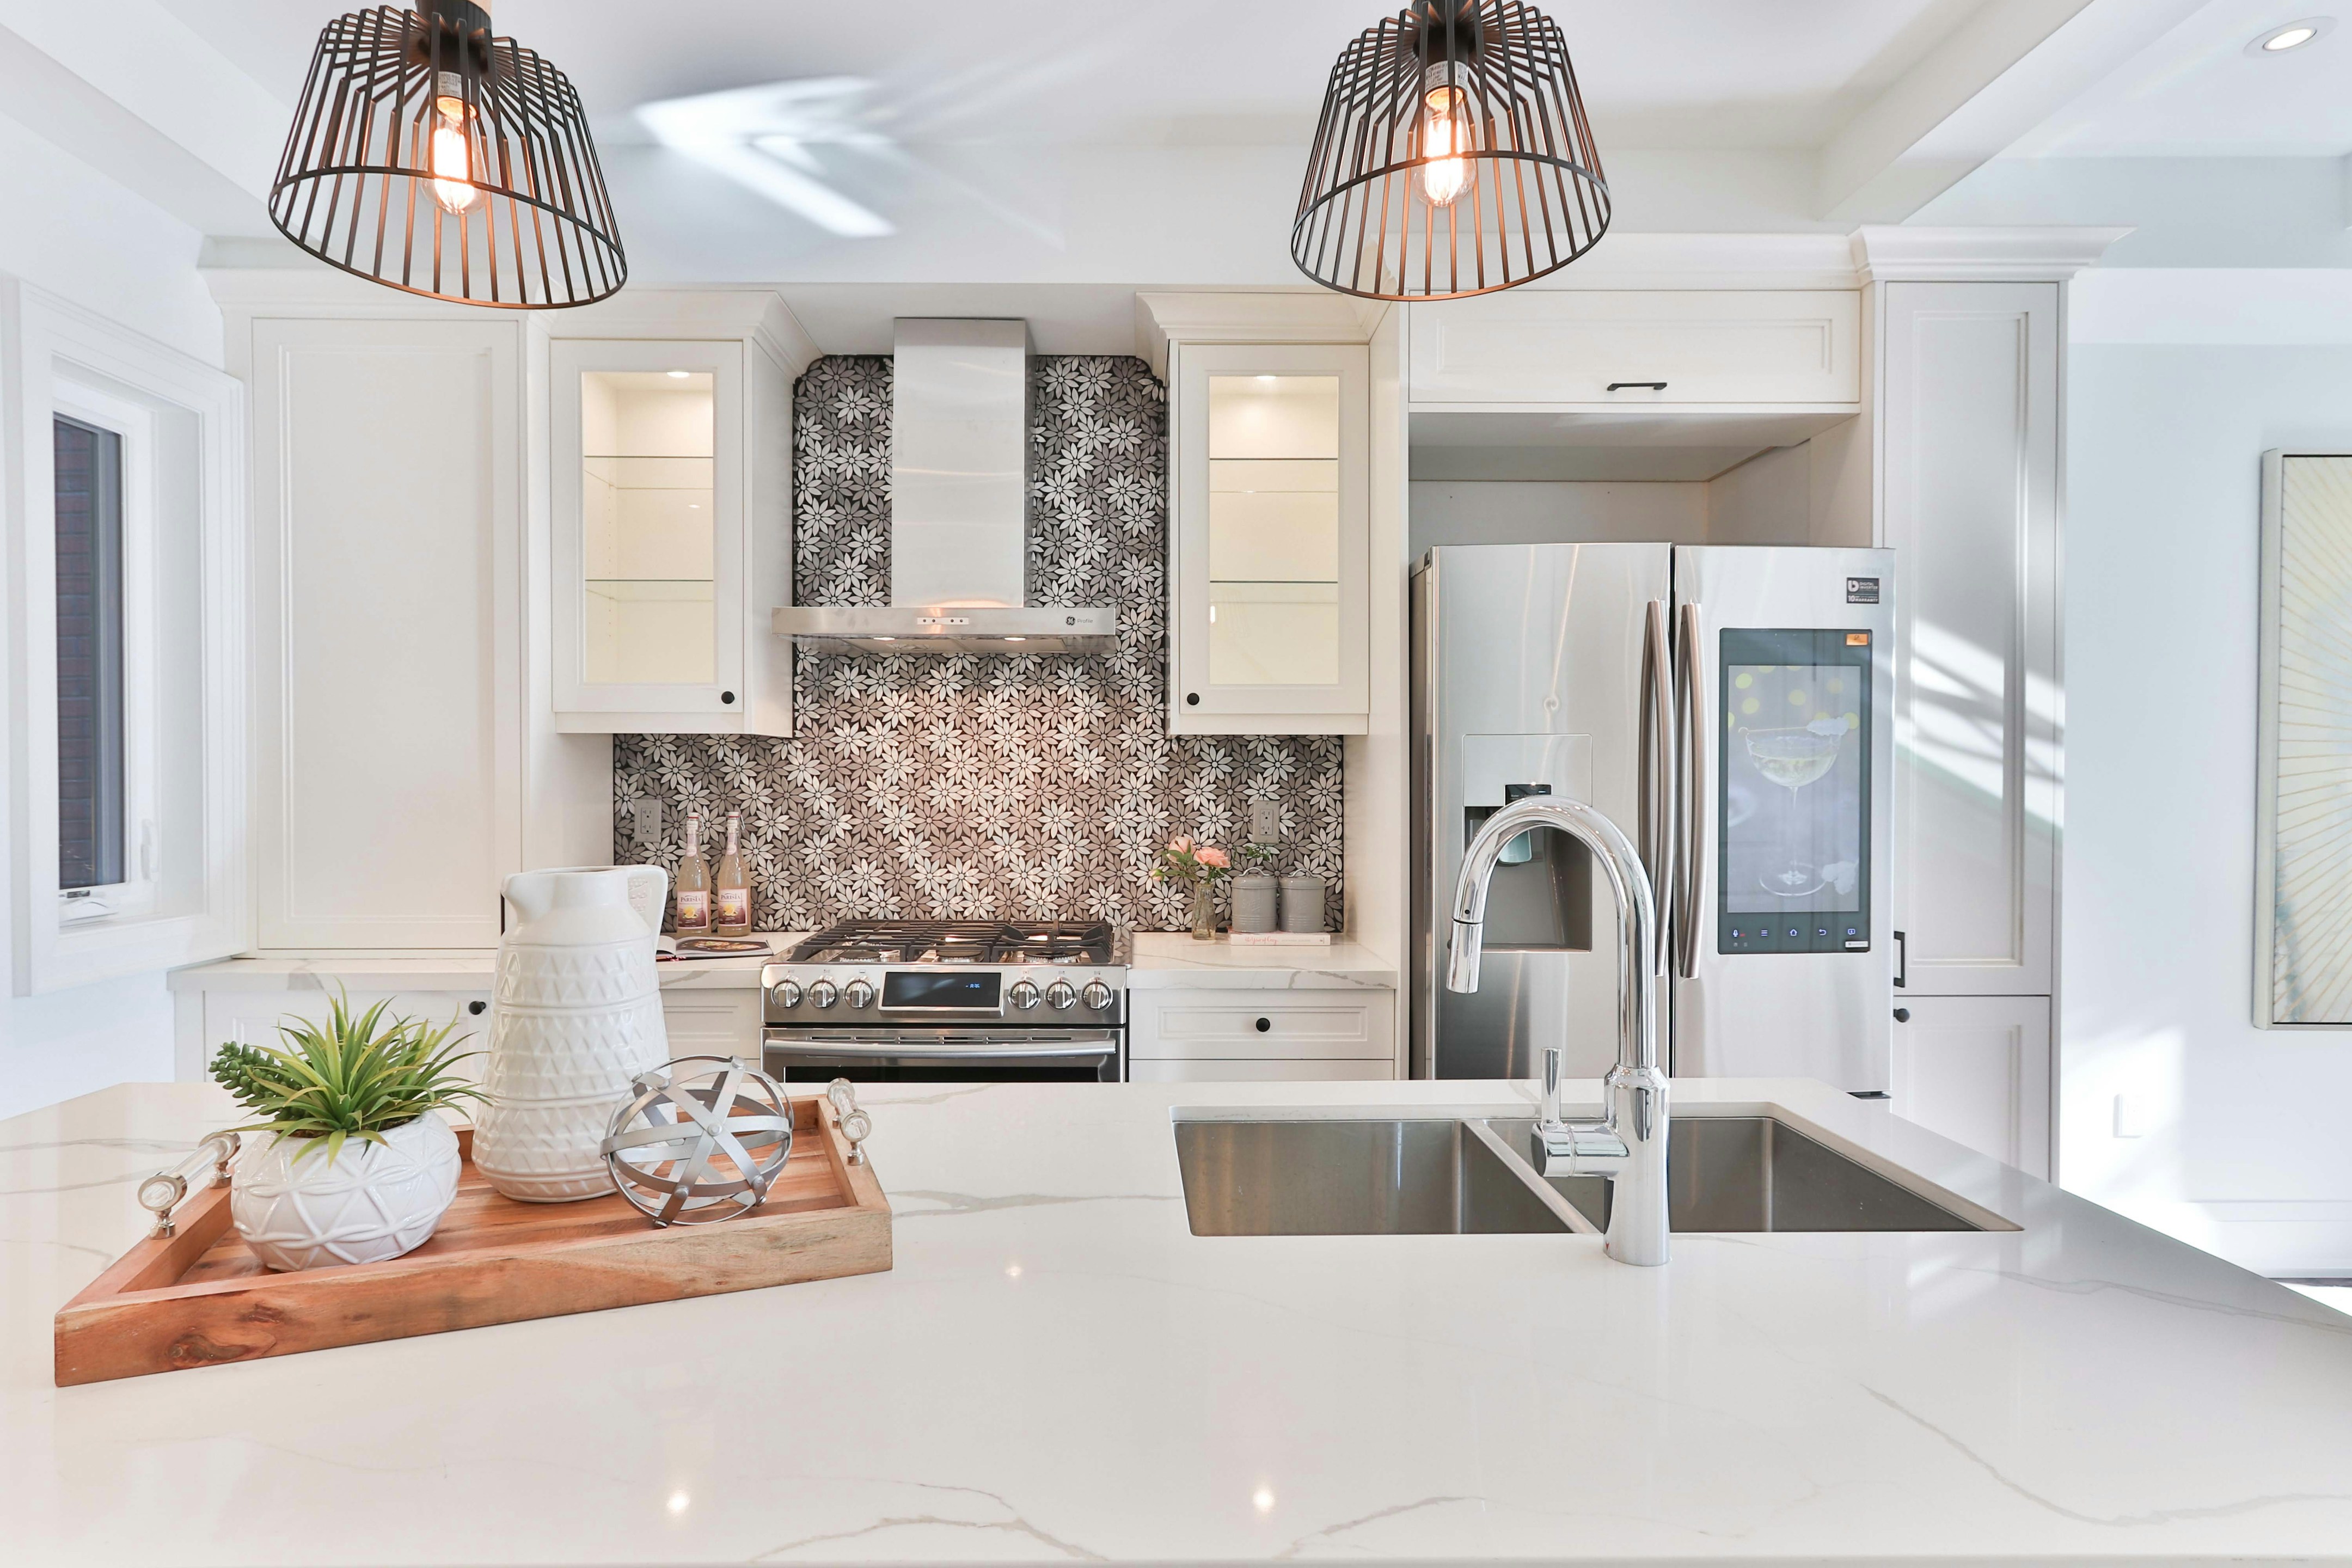 Kitchen Remodel Design Ideas: Transforming Your Culinary Space